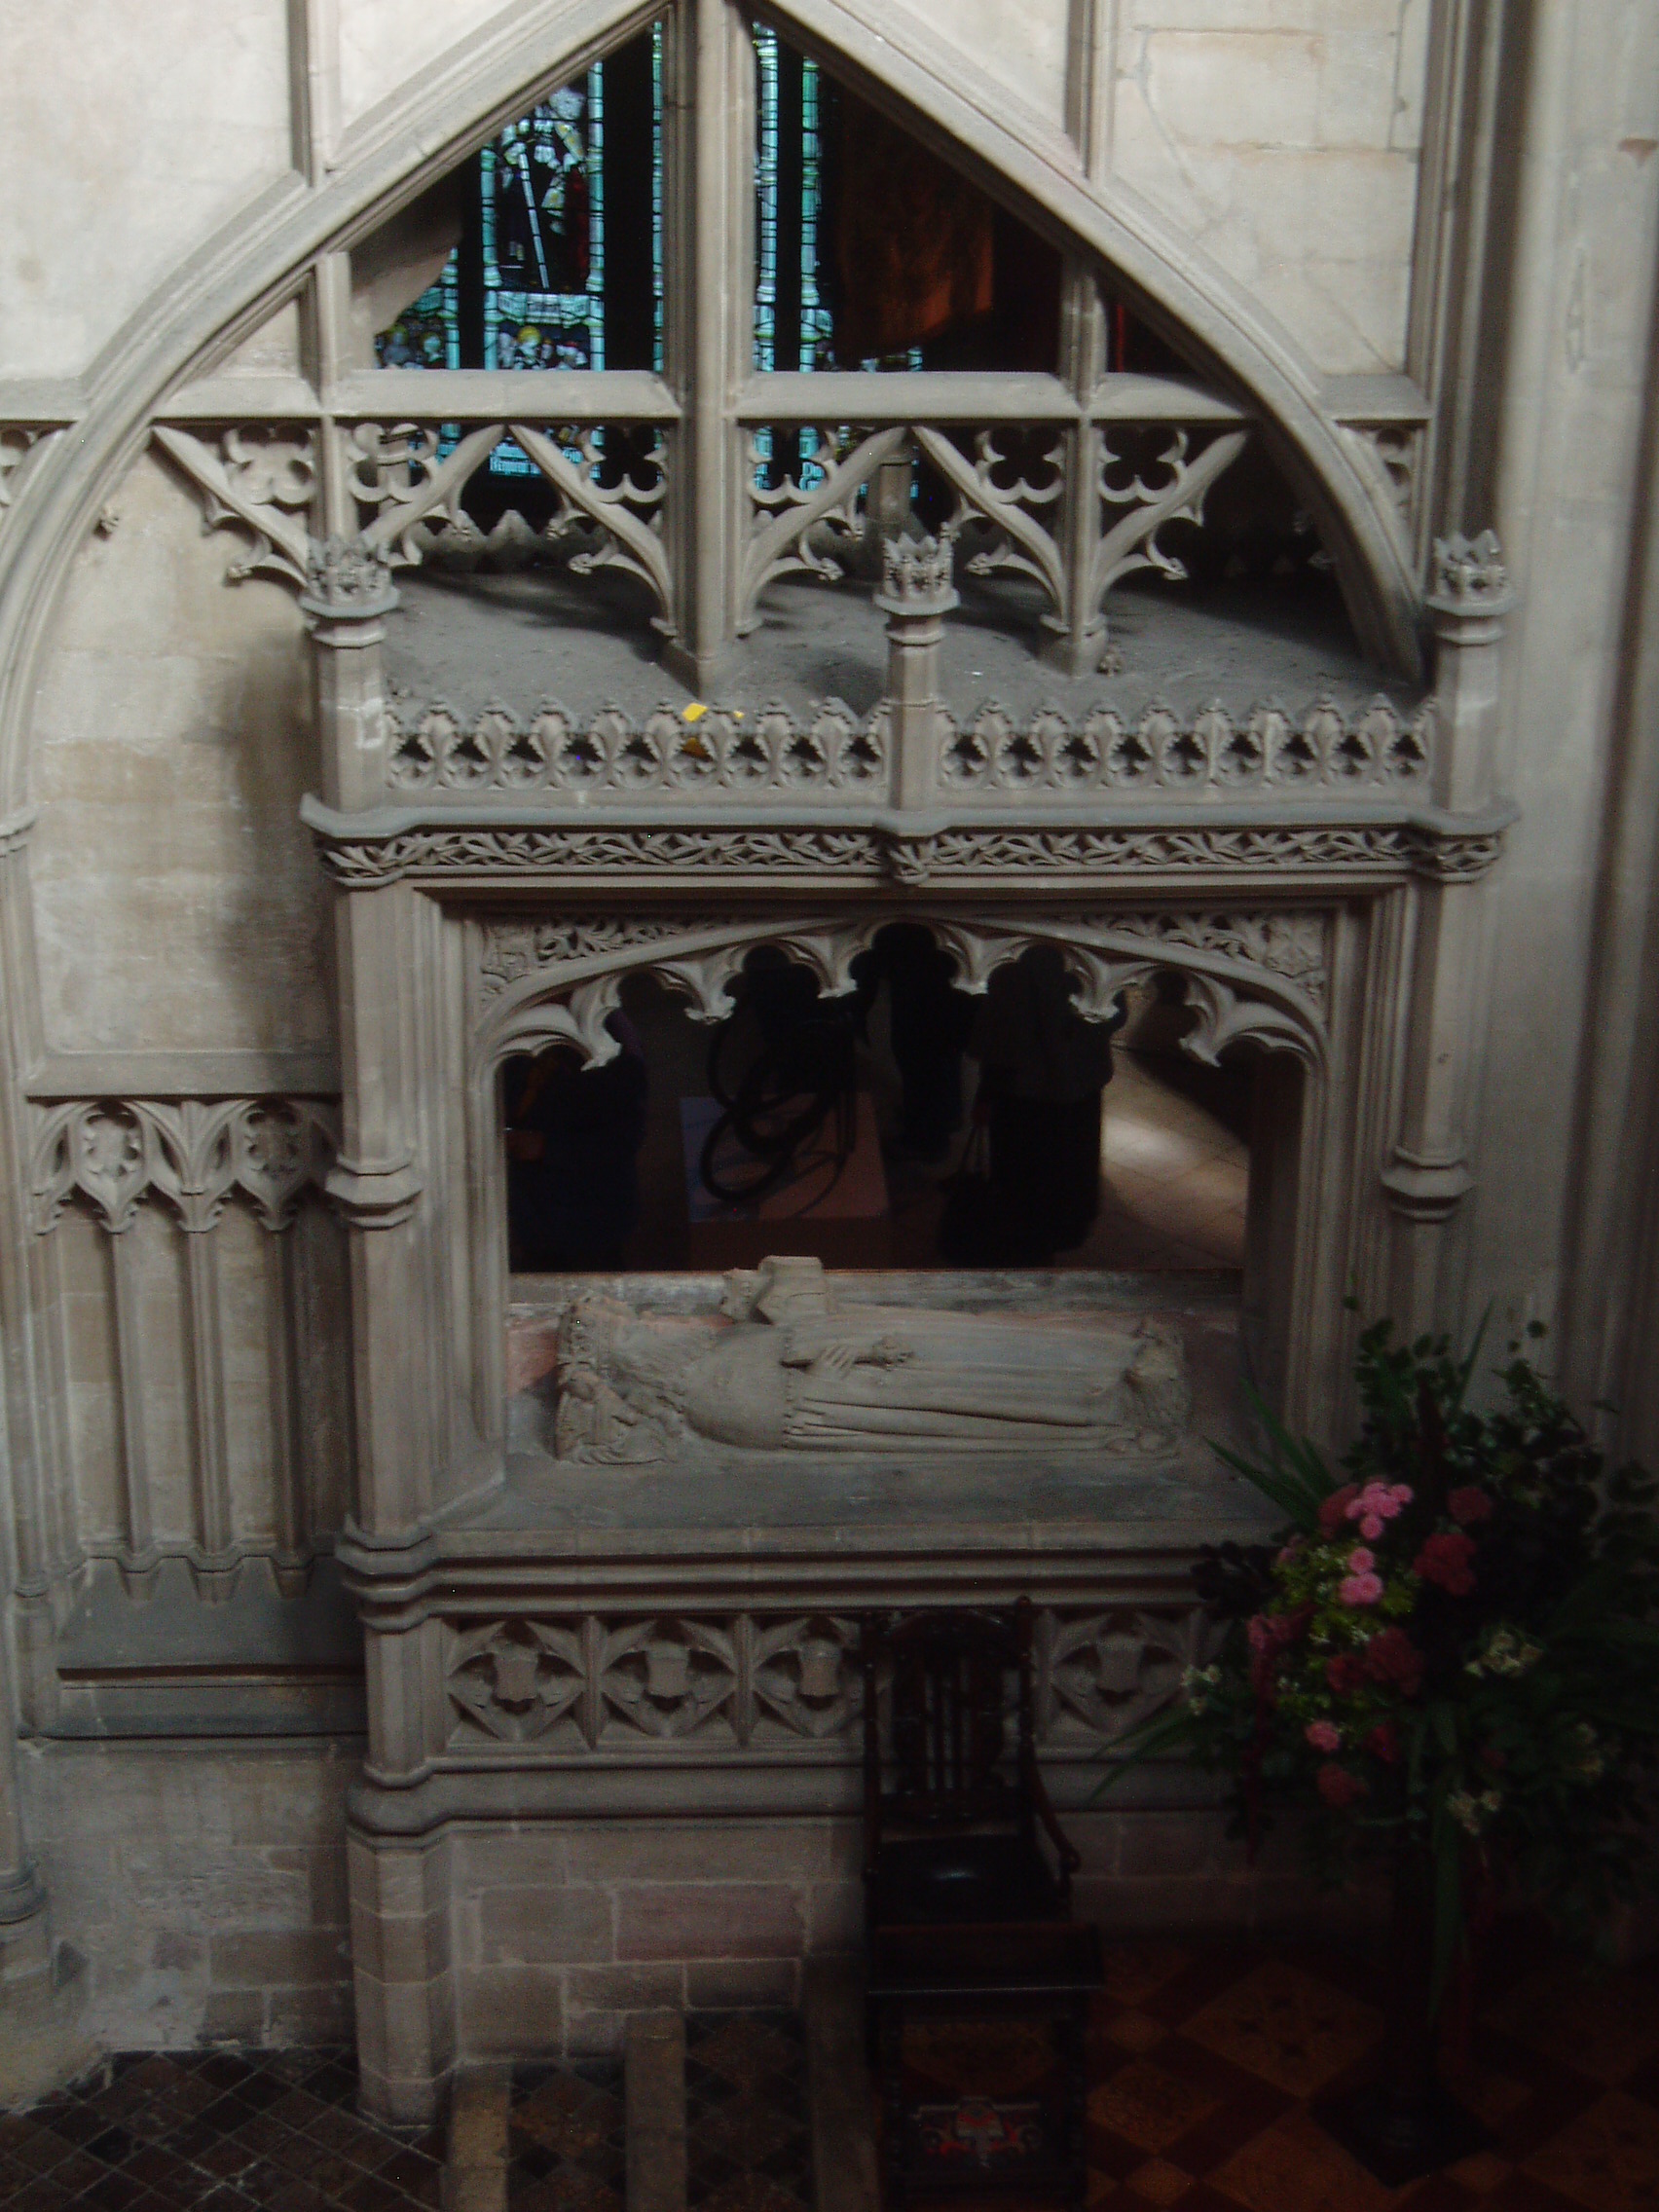 Prince Osric's Tomb, Gloucester Gloucester Cathedral is one of England's finest churches, a masterpiece of medieval architecture consisting of a uniquely beautiful fusion of Norman Romanesque and Perpendicular Gothic from the mid 14th century onwards. Until the Reformation this was merely Gloucester's Abbey of St Peter, under Henry VIII it became one of six former monastic churches to be promoted to cathedral status, thus saving the great church from the ravages of the Dissolution. The most obviously Norman part is the nave, immediately apparent on entering the building with it's round arches and thick columns (the exterior is the result of Gothic remodelling). Much of the remainder of the building is substantially the Norman structure also, but almost entirely modified in the later Middle Ages inside and out, the result of the great revenue brought to the abbey by pilgrims to the tomb of the murdered King Edward II in the choir. It was this transformation of the Norman church that is credited with launching the late gothic Perpendicular style in England. The gothic choir is a unique and spectacular work, the walls so heavily panelled as to suggest a huge stone cage (disguising the Norman arches behind) crowned by a glorious net-like vault adorned with numerous bosses (those over the Altar with superb figures of Christ and angels) whilst the east wall is entirely glazing in delicate stone tracery, and still preserving most of it's original 14th century stained glass. The soaring central tower, also richly panelled with delicate pinnacles, is another testament to the abbey's increasing wealth at this time. The latest medieval additions to the church are equally glorious, the Lady Chapel is entered through the enormous east window and is itself a largely glazed structure, though the original glass has been reduced to a few fragments in the east window, the remainder now contains beautiful Arts & Crafts stained glass by Christopher and Veronica Whall. The early 16th century cloisters to the north of the nave are some of the most beautiful anywhere, being completely covered by exquisite fan vaulting, with a seperate lavatorium (washing room) attached to the north walk as a miniature version of the main passages. There is much more of interest, from 14th century choir stalls with misericords to the comprehensive collection of tombs and monuments of various dates, including the elaborate tomb of Edward II and that of Robert Duke of Normandy, eldest son of William the Conqueror. The stained glass also represents all ages, from the 14th century to the striking contemporary windows by Tom Denny. Further areas of the cathedral can be accessed at certain times, such as the Norman crypt under the choir and the triforium gallery above. My visit coincided with the major 'Crucible' exhibition of contemporary sculpture (September-October 2010), examples of which I will upload in due course.